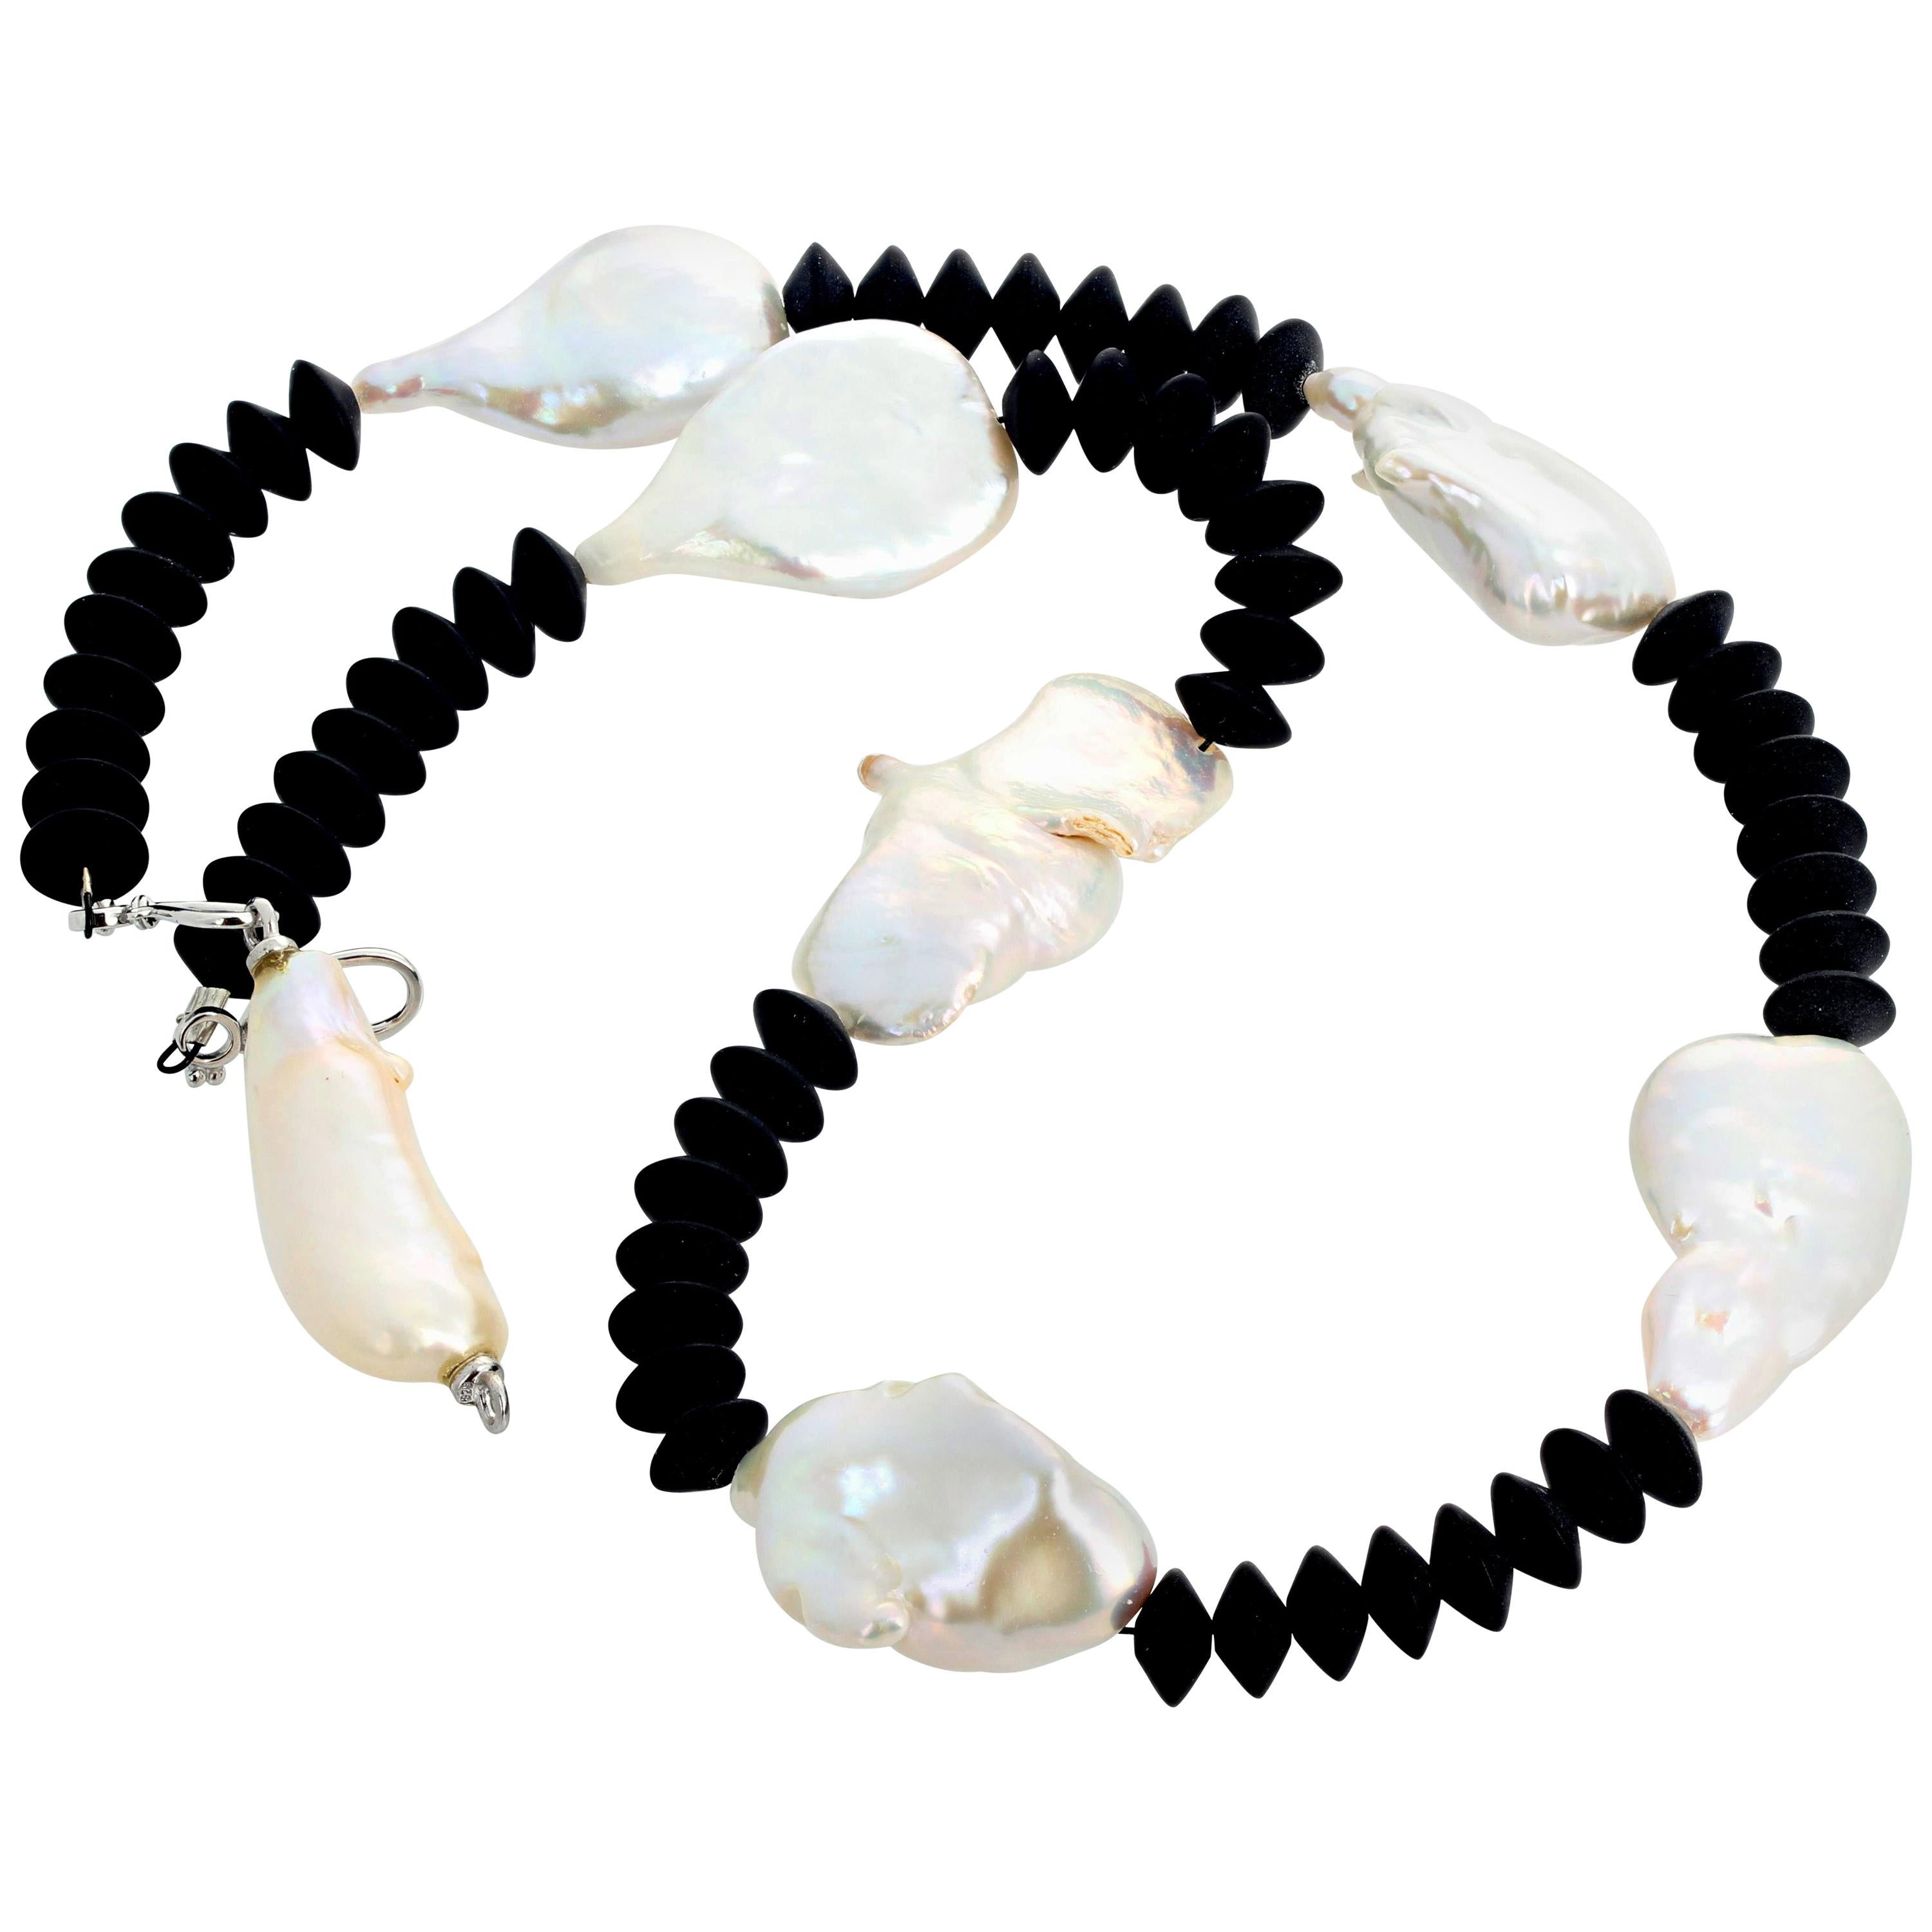 AJD Abstract Modern Black Onyx and Cultured Ocean Pearl Coctail Necklace